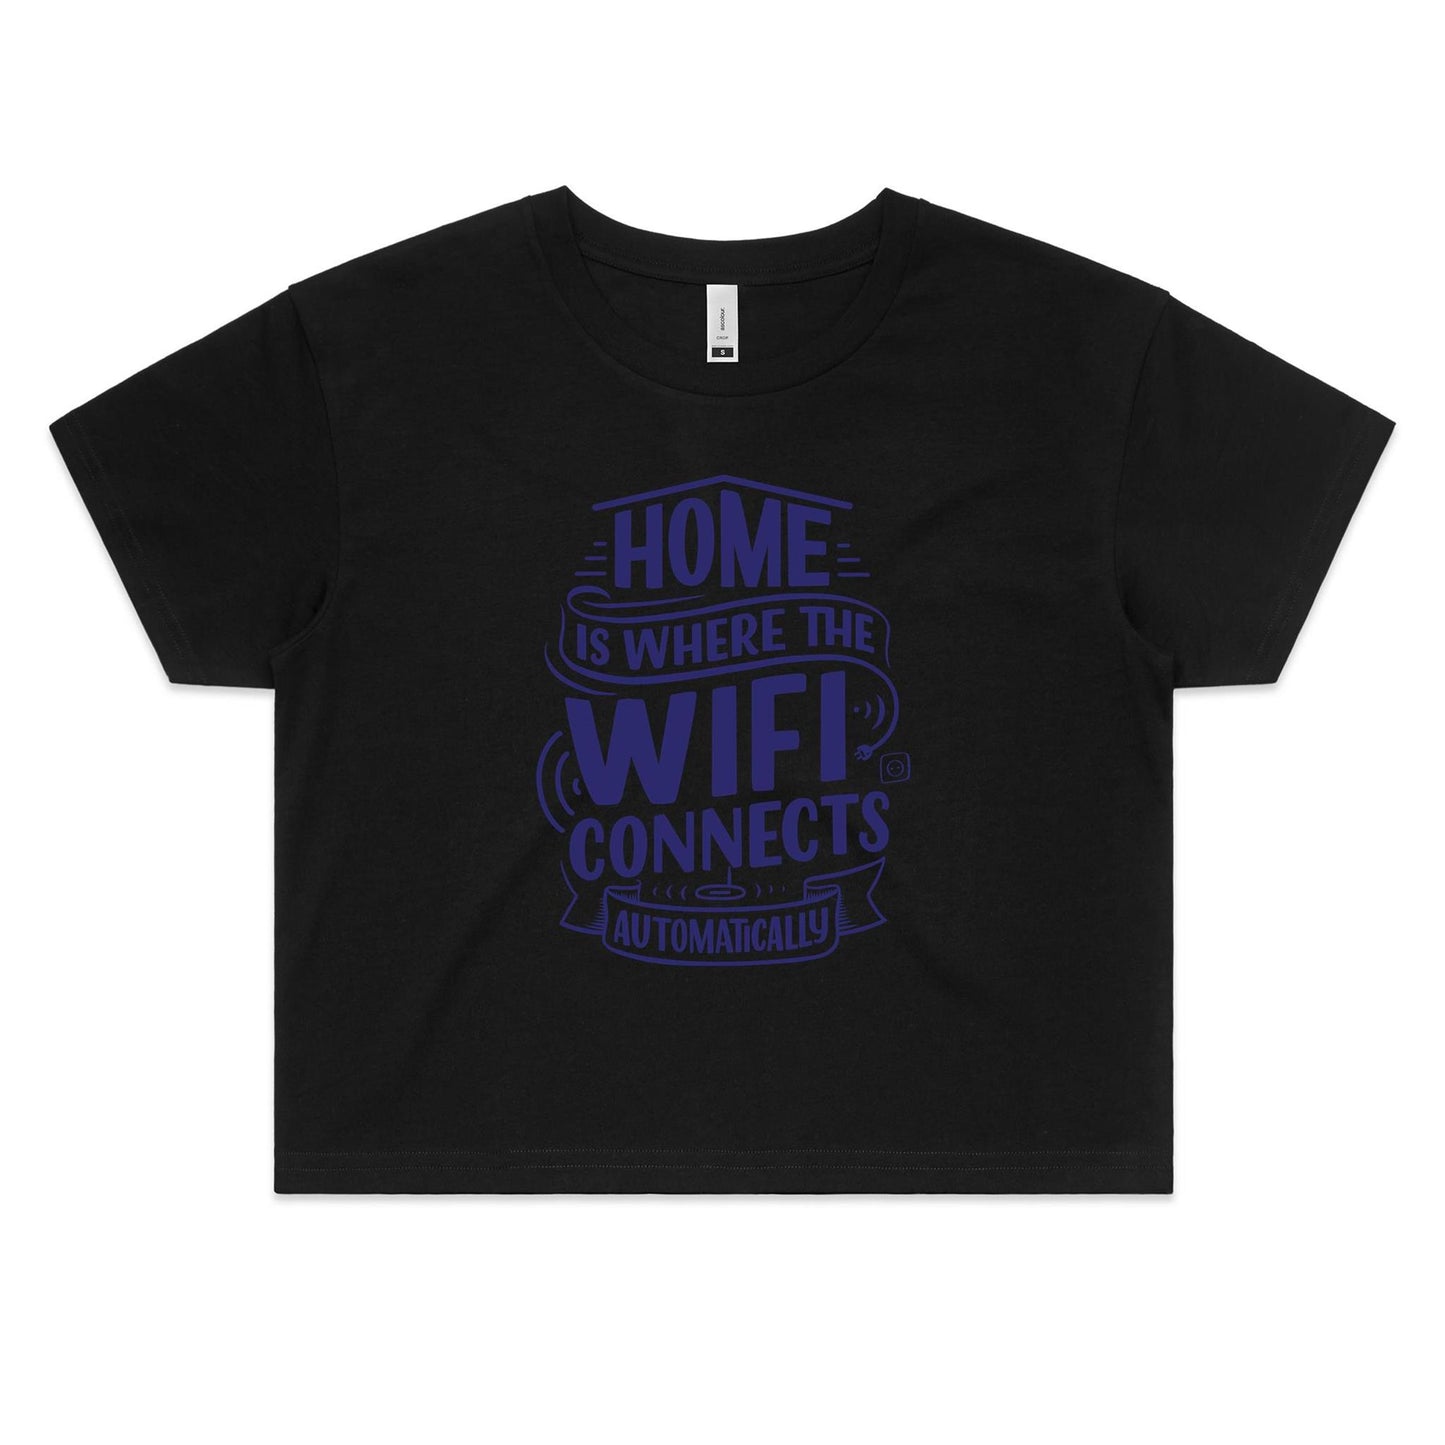 Home Is Where The WIFI Connects Automatically - Women's Crop Tee Black Womens Crop Top Tech